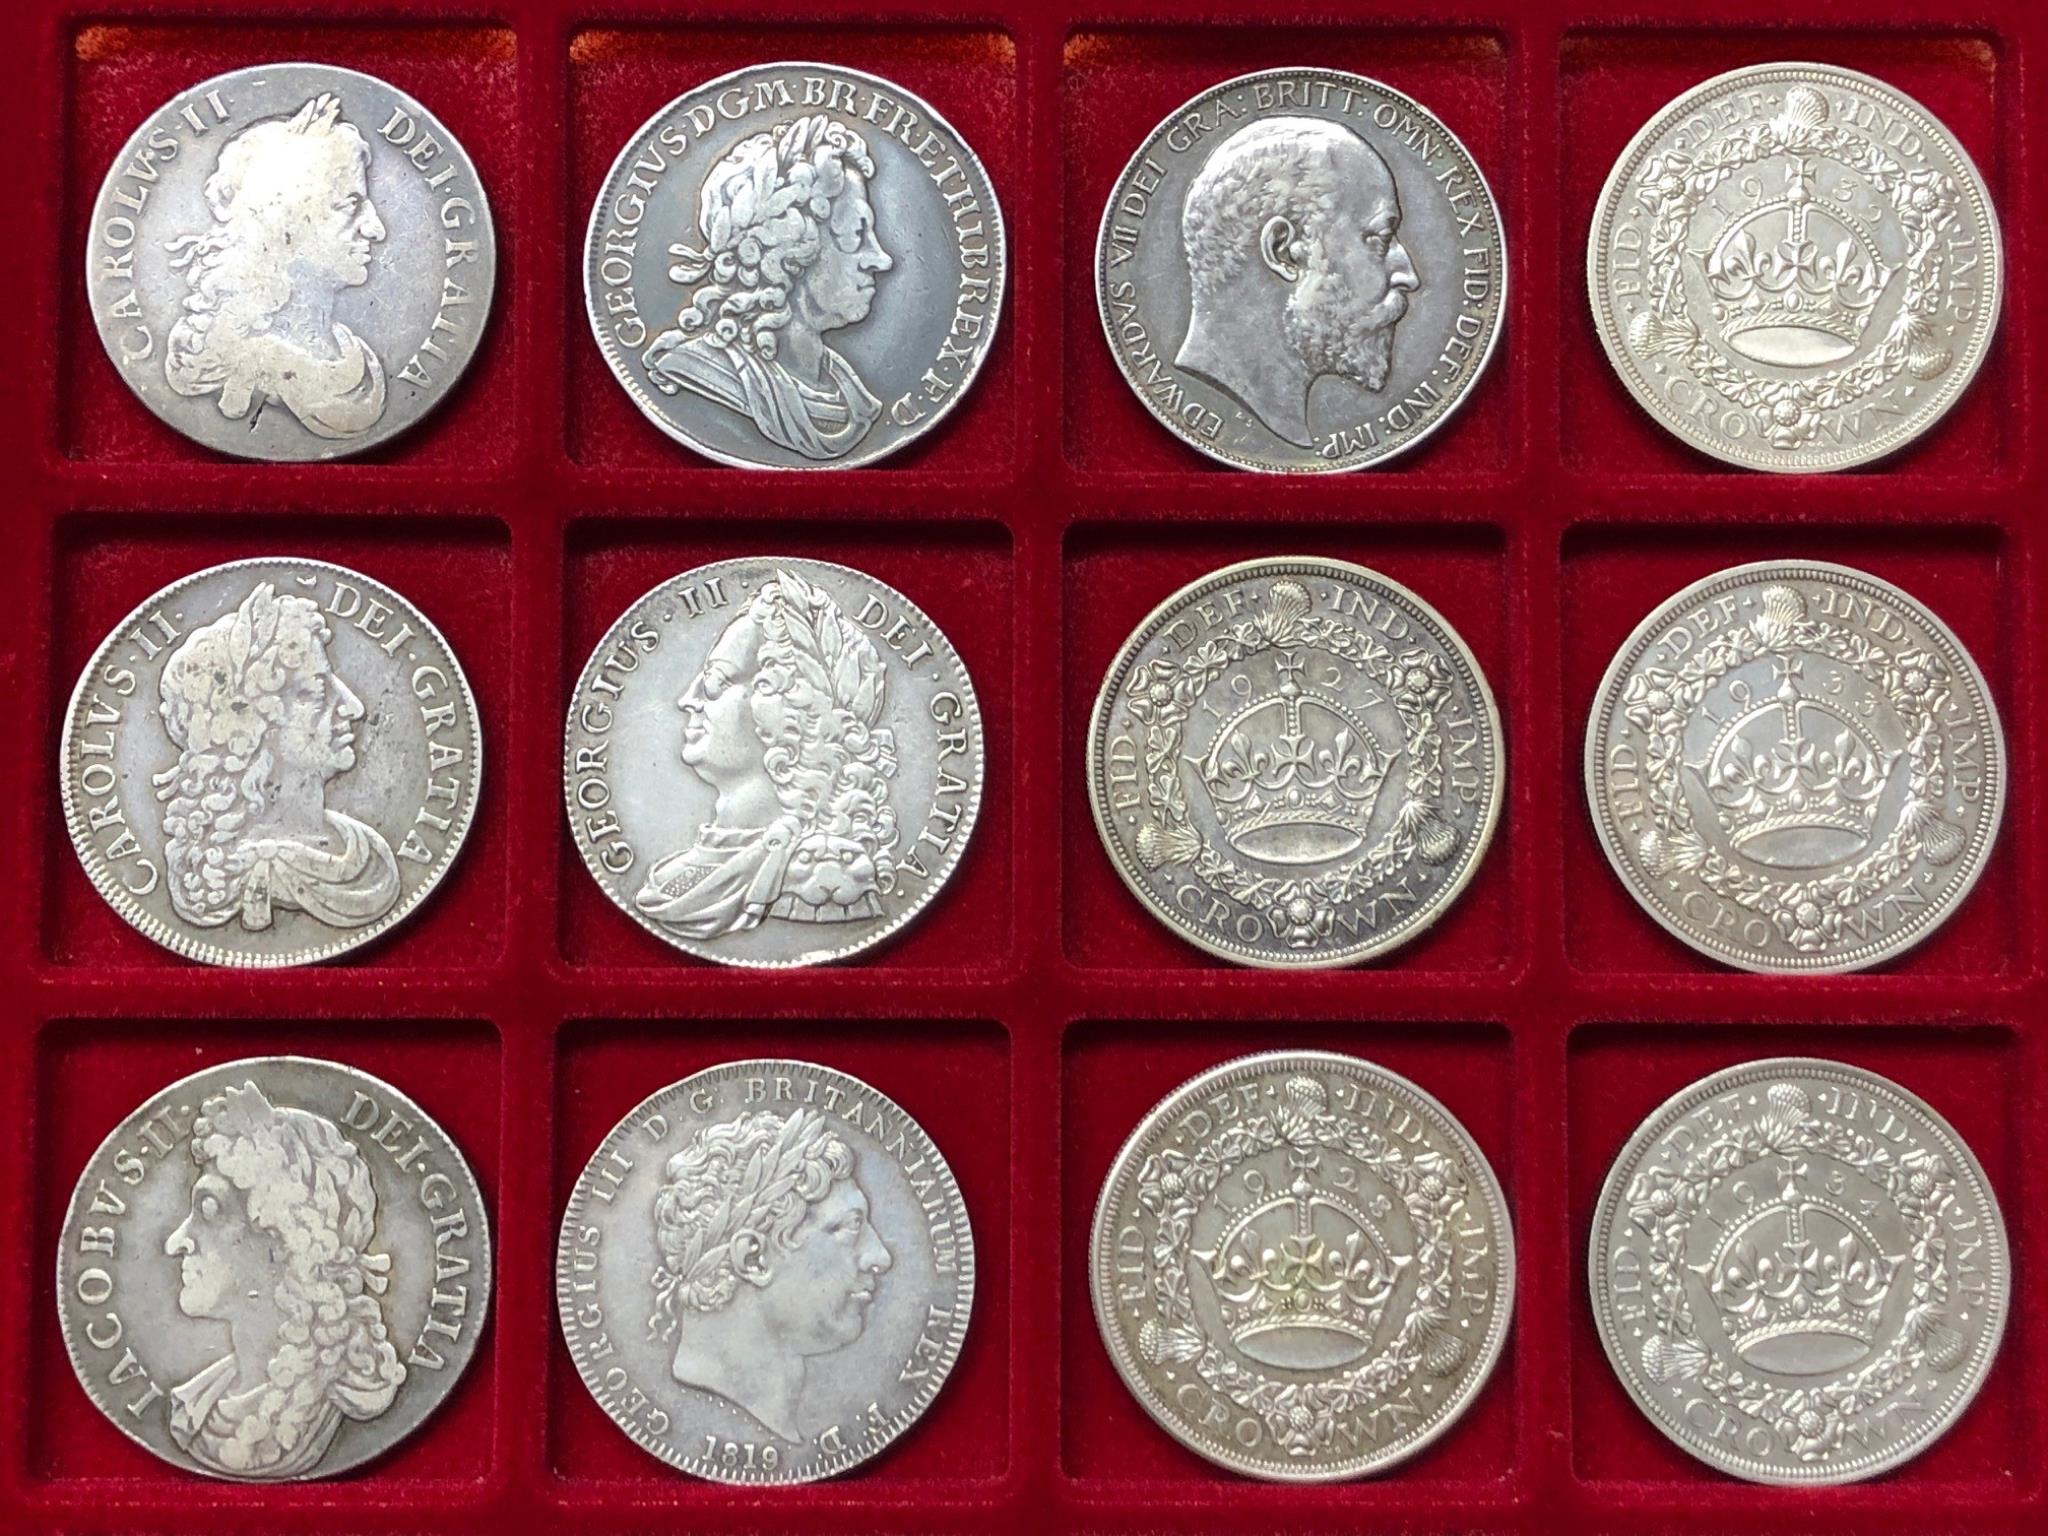 Departments Stamps & Coins | East Bristol Auctions - The Specialist Auctioneers